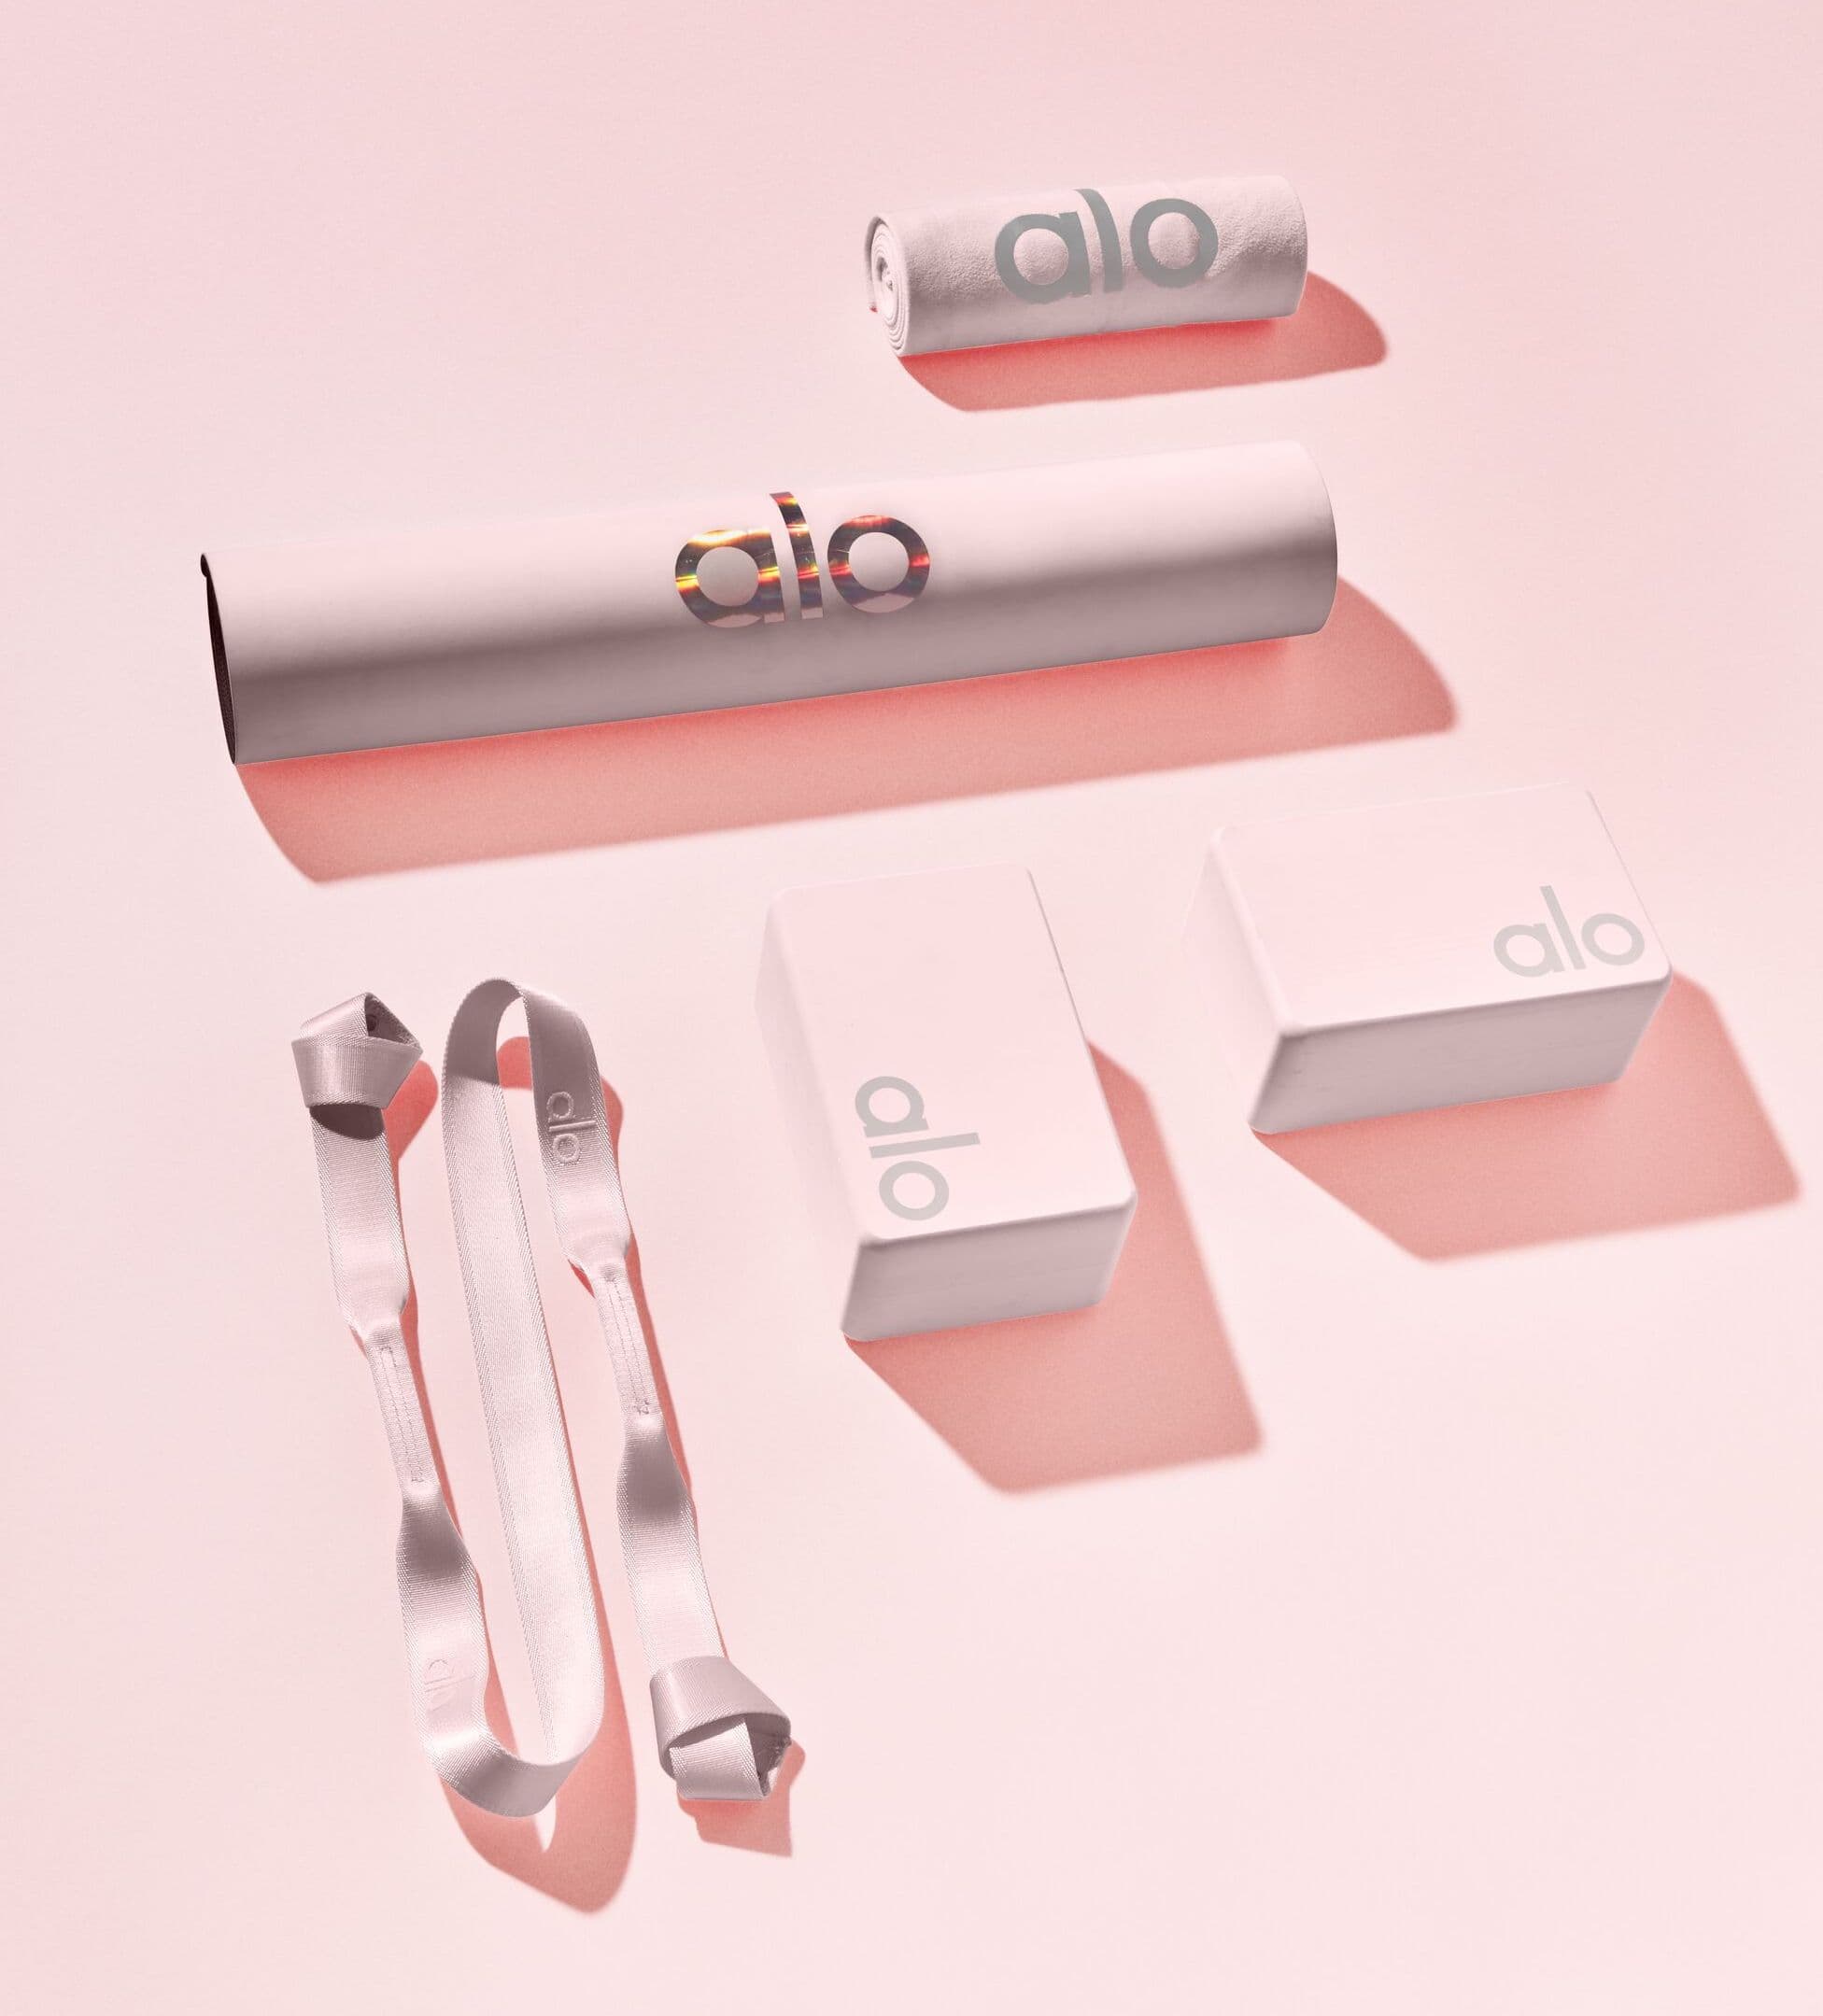 A photo of an Alo yoga mat, yoga strap, yoga blocks, and yoga non-slip mat in a light pink color displayed on a light pink background.  